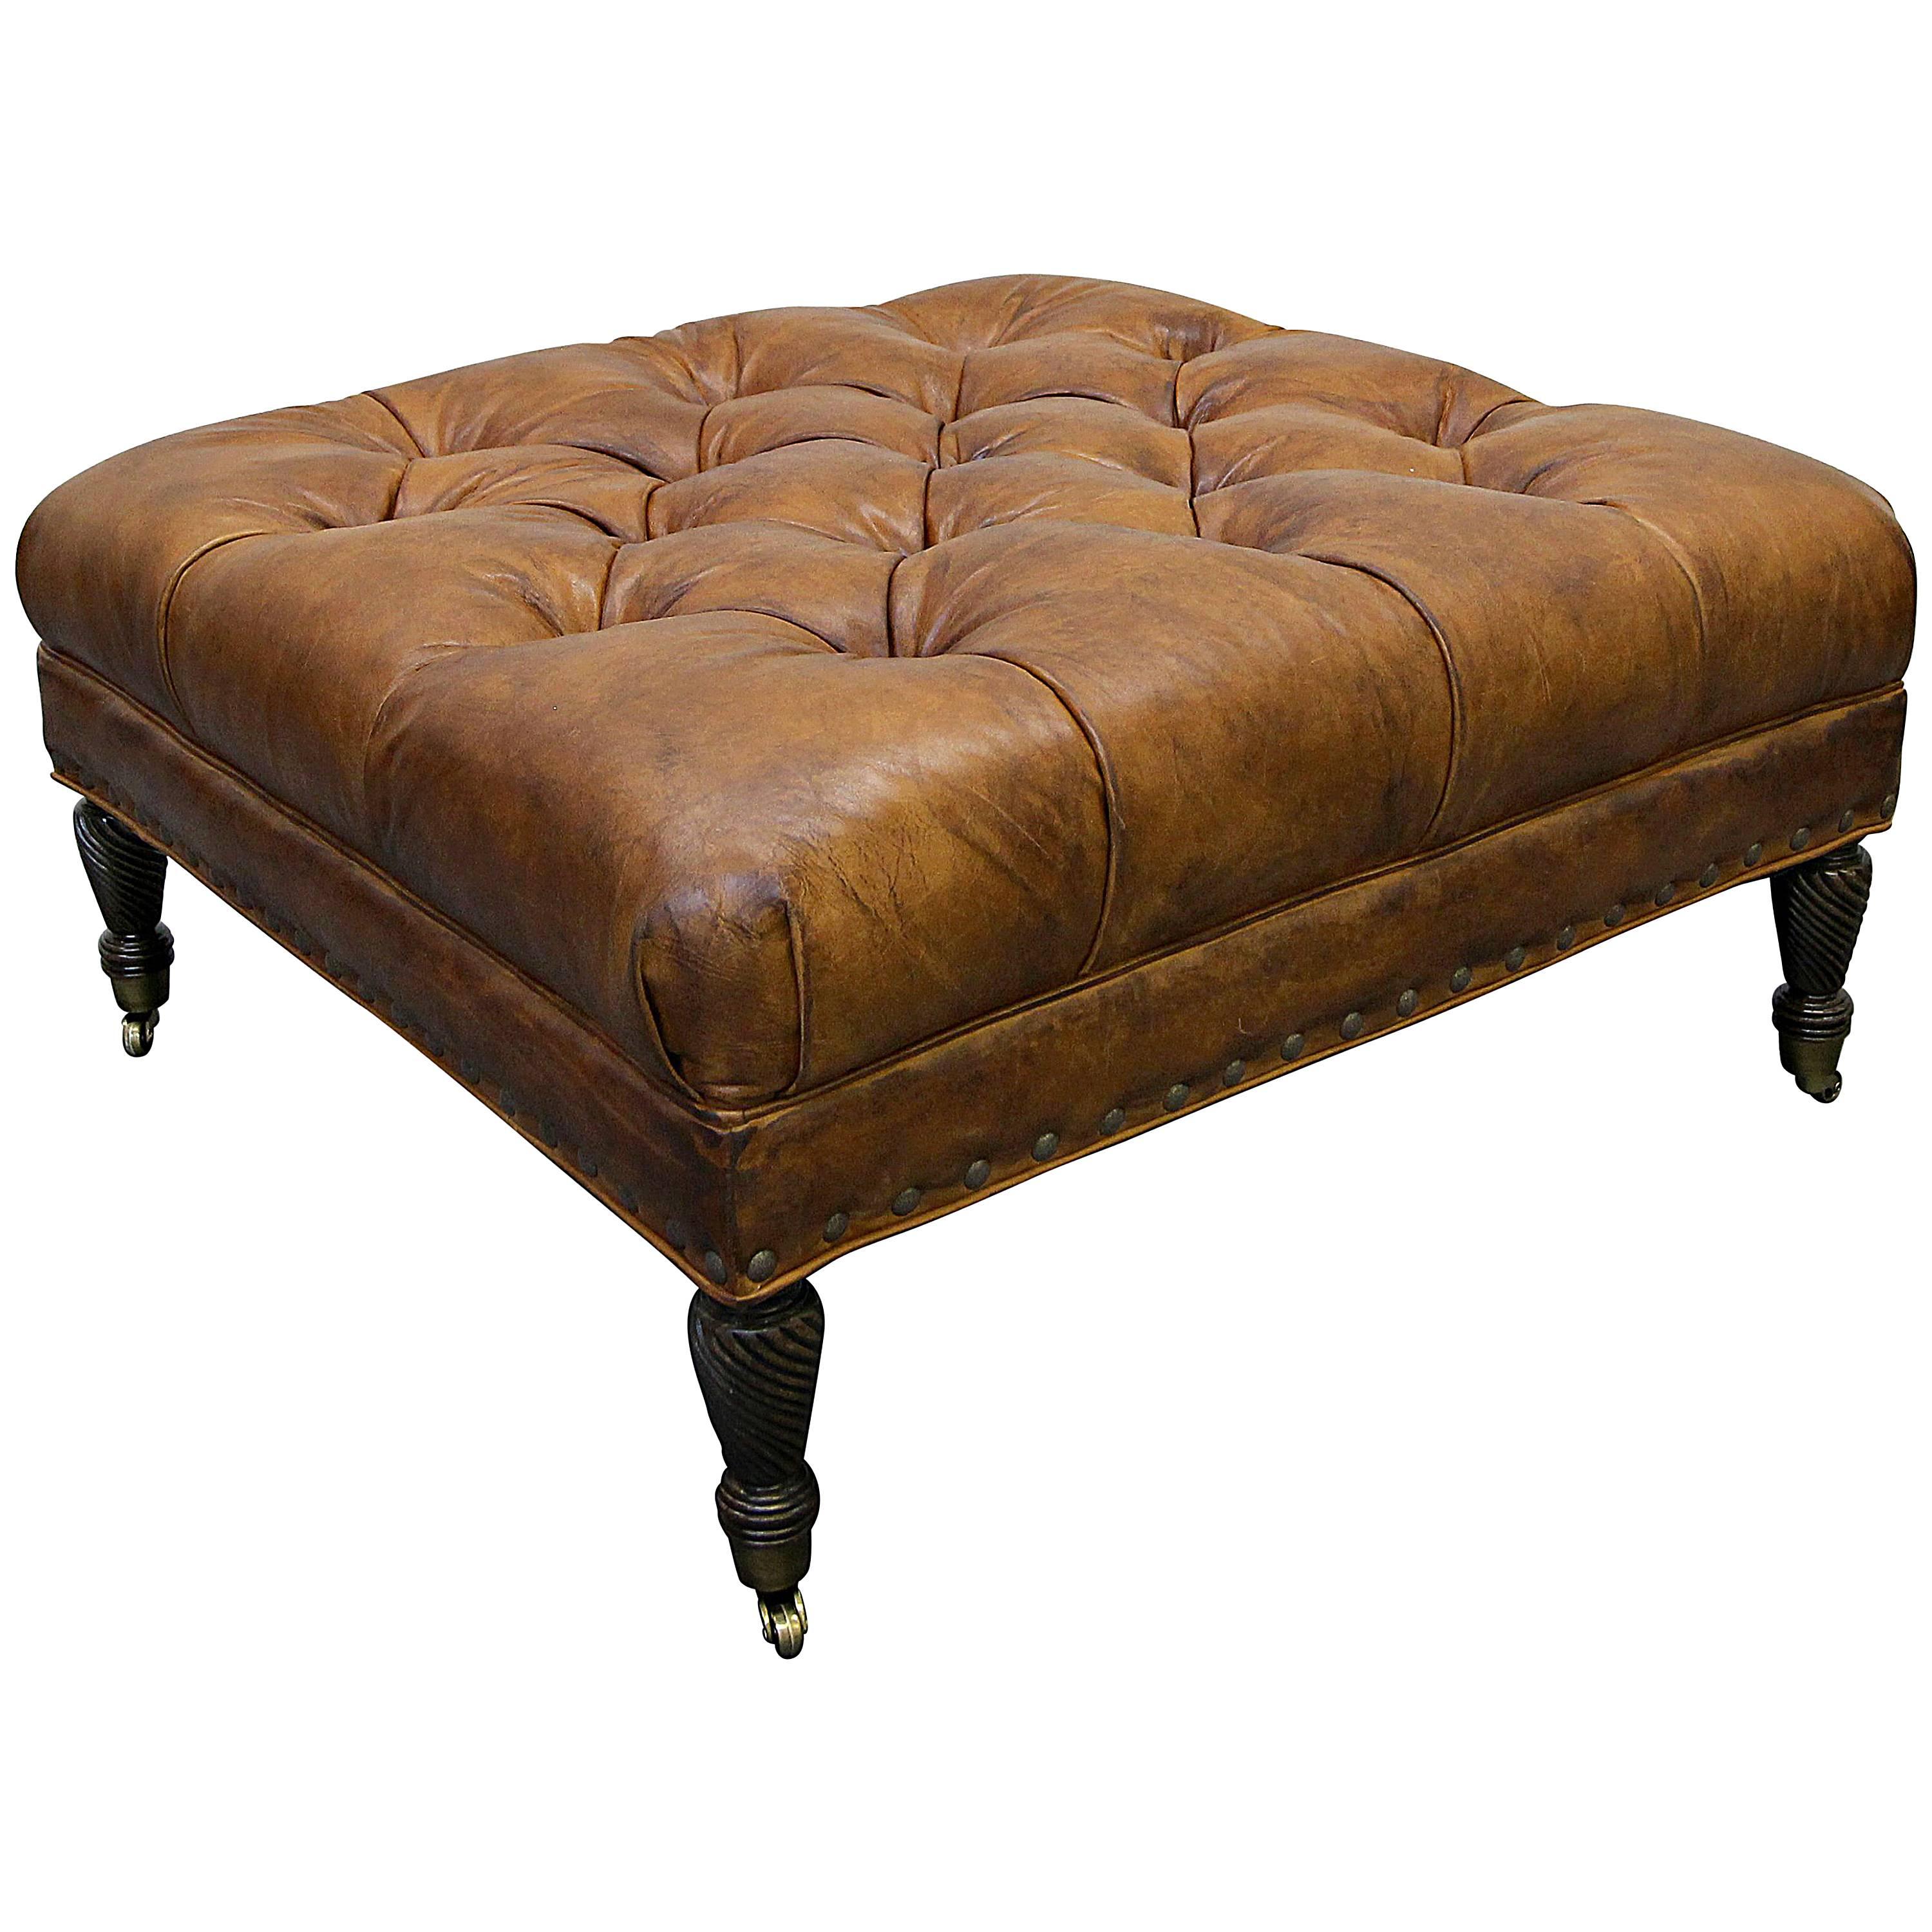 Large English Style Leather Tufted Chesterfield Ottoman with Gorgeous Patina